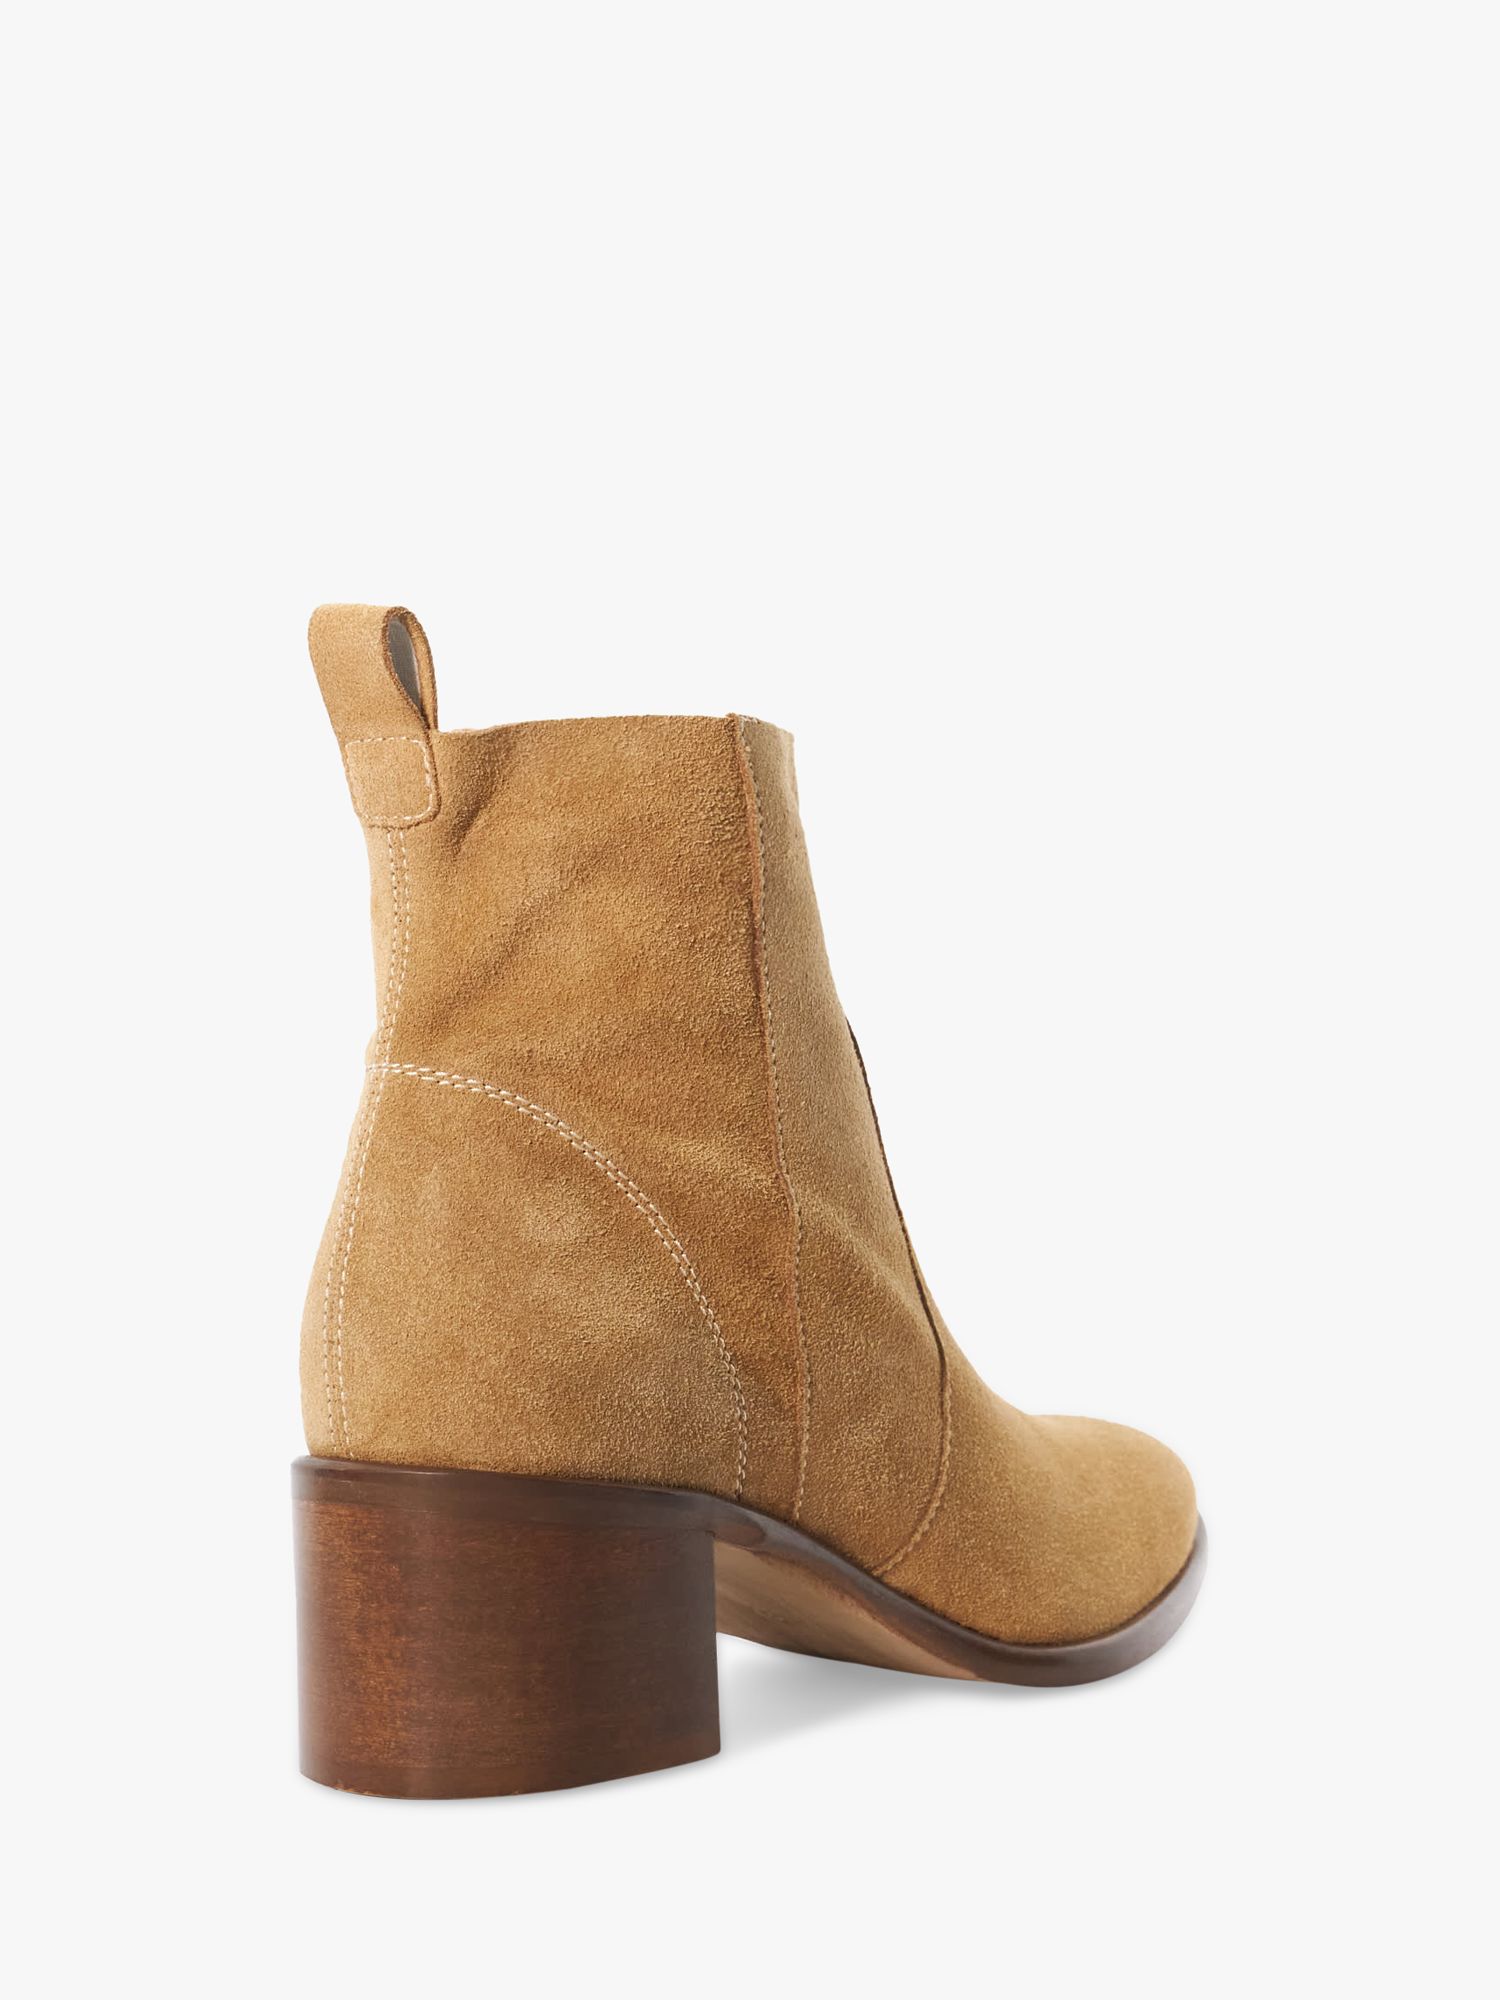 Buy Dune Paprikaa Suede Ankle Boots Online at johnlewis.com